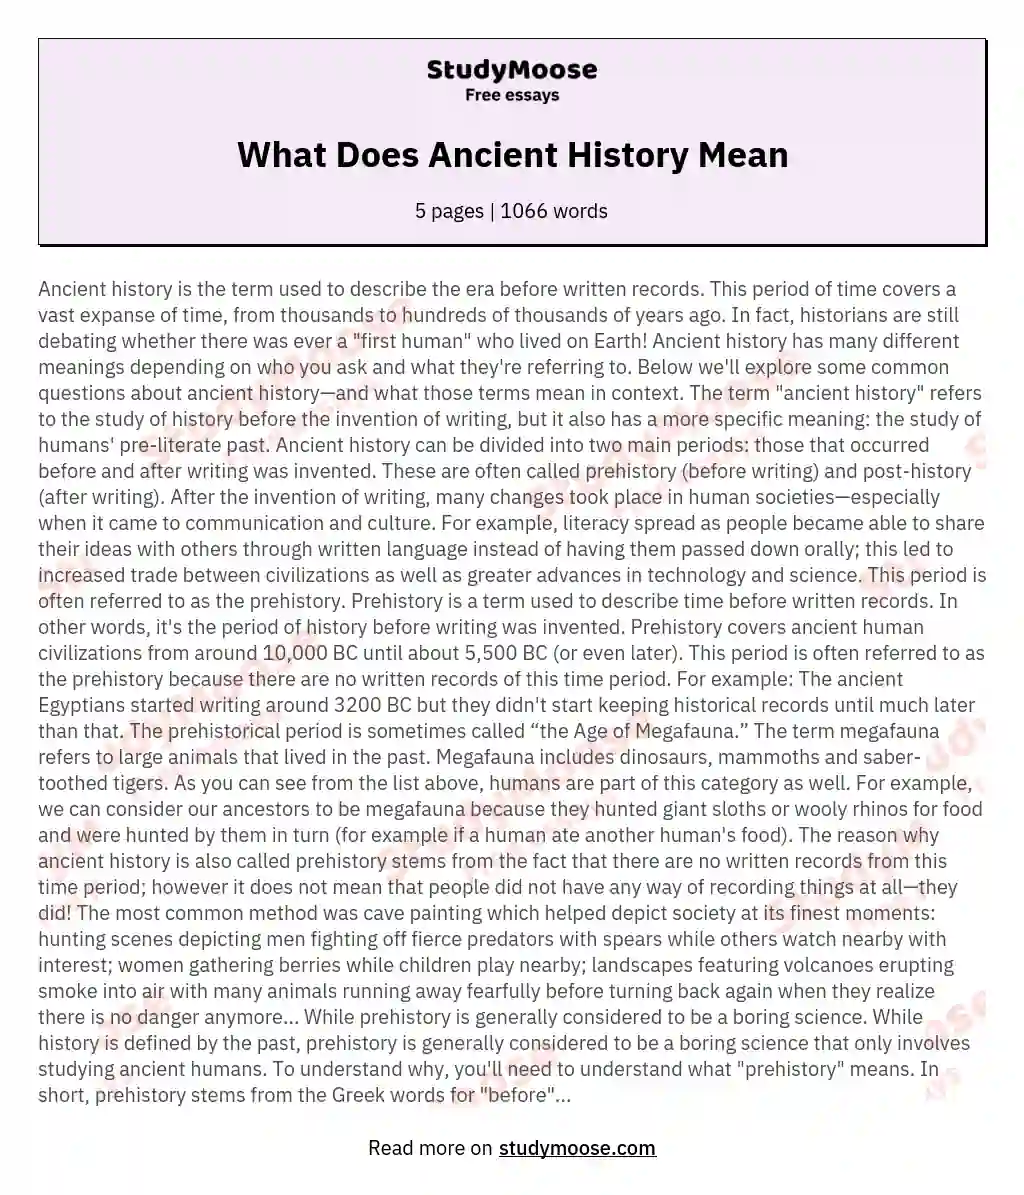 What Does Ancient History Mean essay